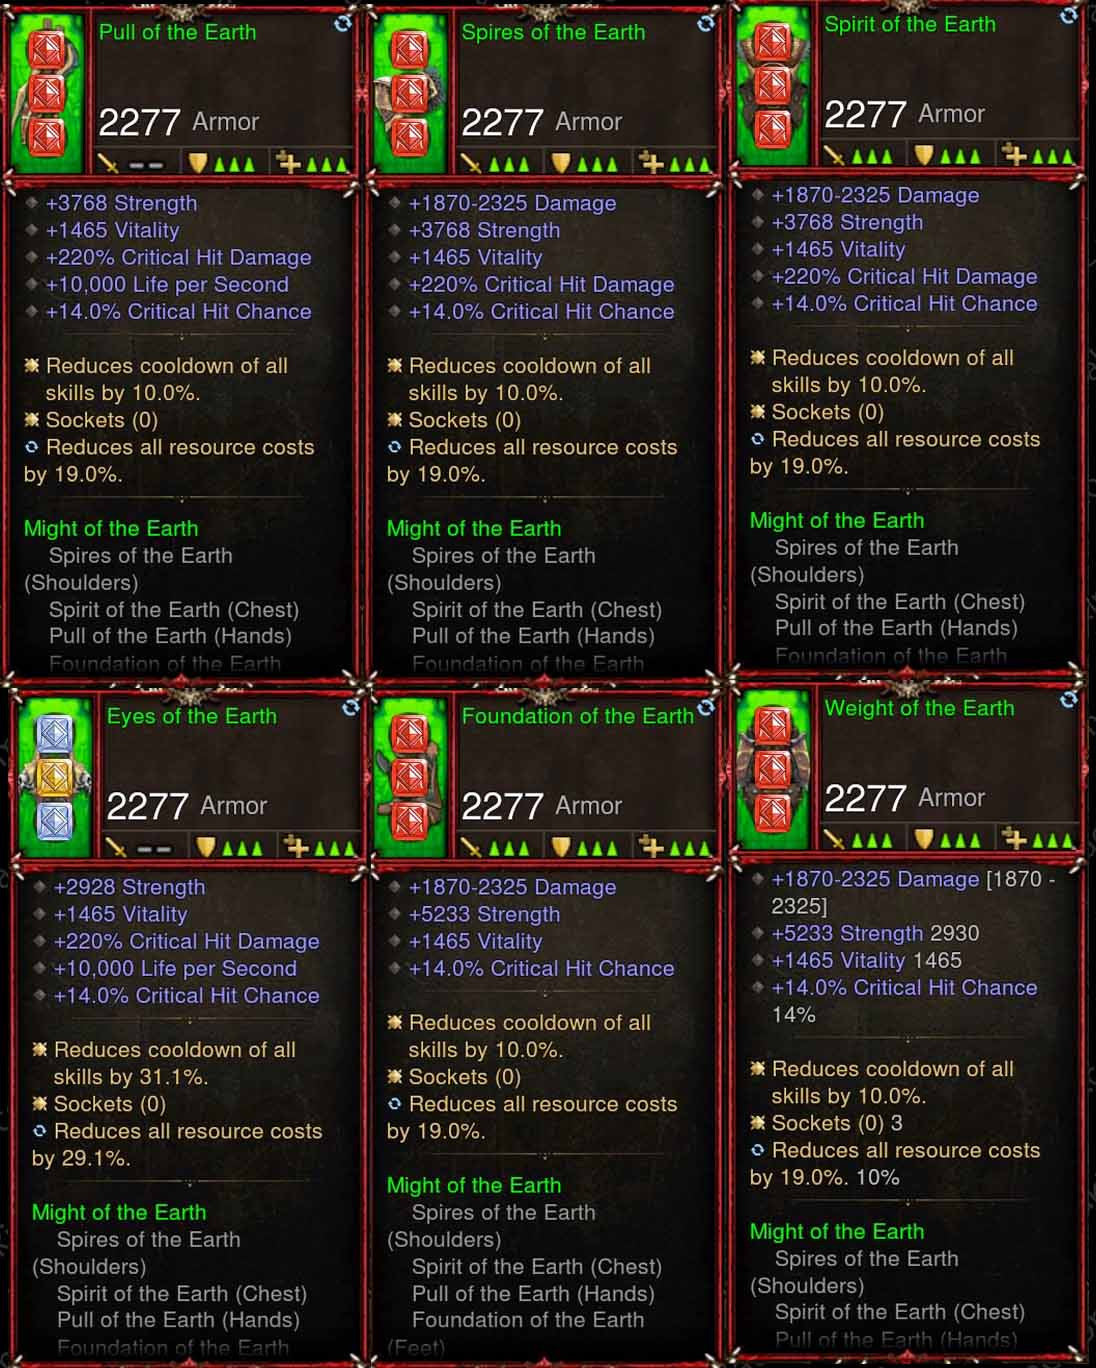 [Primal Ancient] 6x Earth Barbarian Set Diablo 3 Mods ROS Seasonal and Non Seasonal Save Mod - Modded Items and Gear - Hacks - Cheats - Trainers for Playstation 4 - Playstation 5 - Nintendo Switch - Xbox One